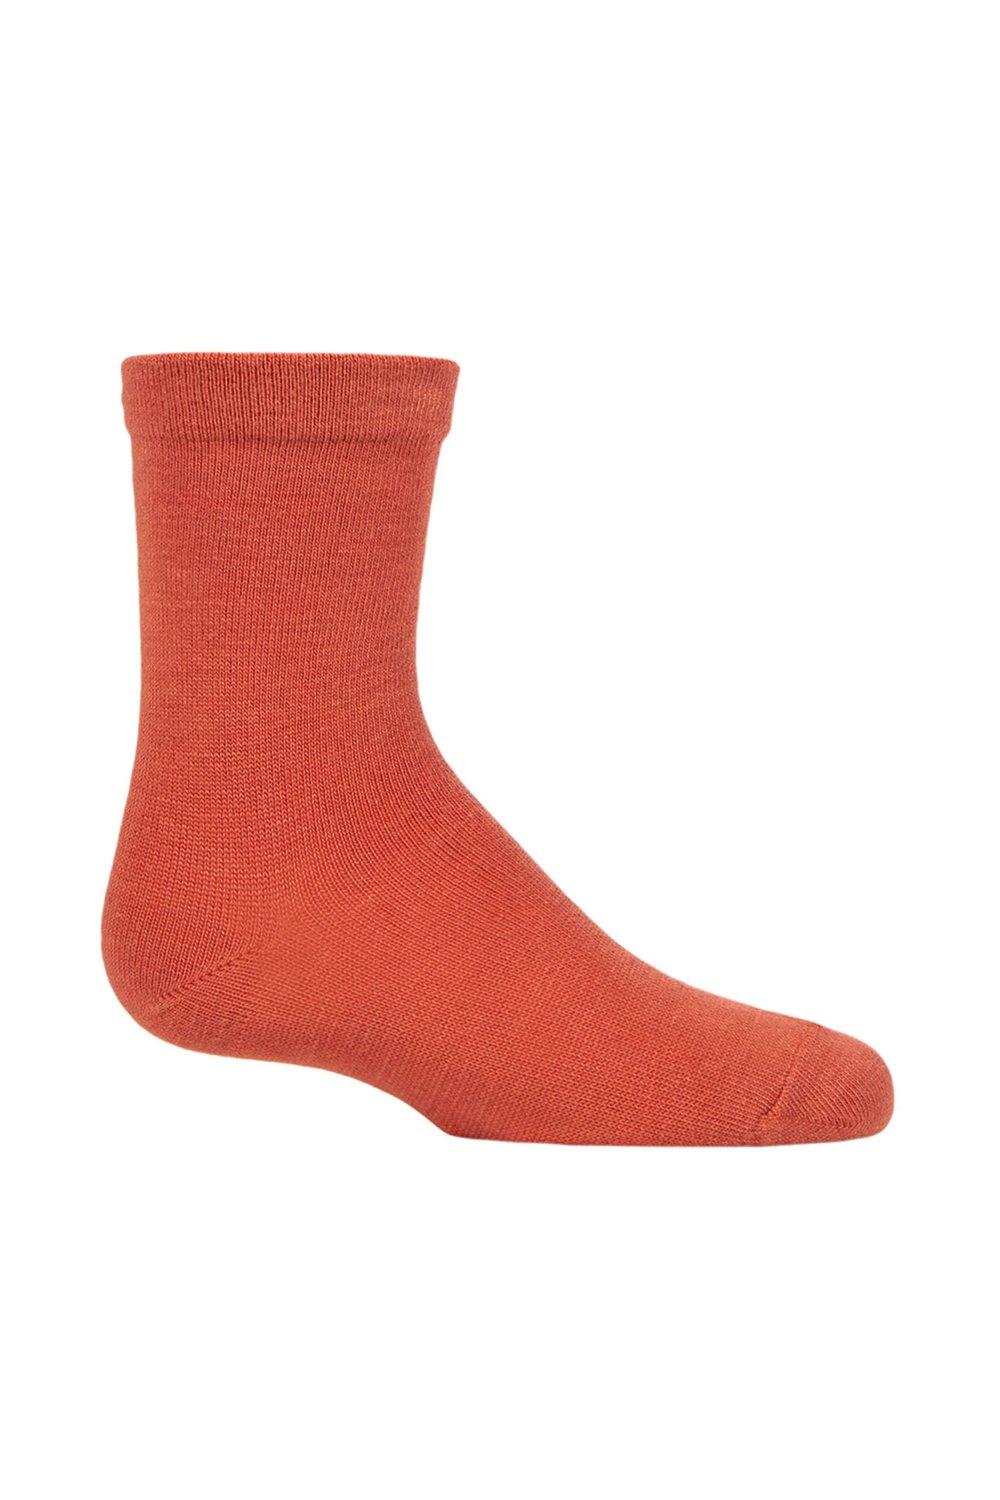 1 Pair Plain Bamboo Socks with Comfort Cuff and Smooth Toe Seams